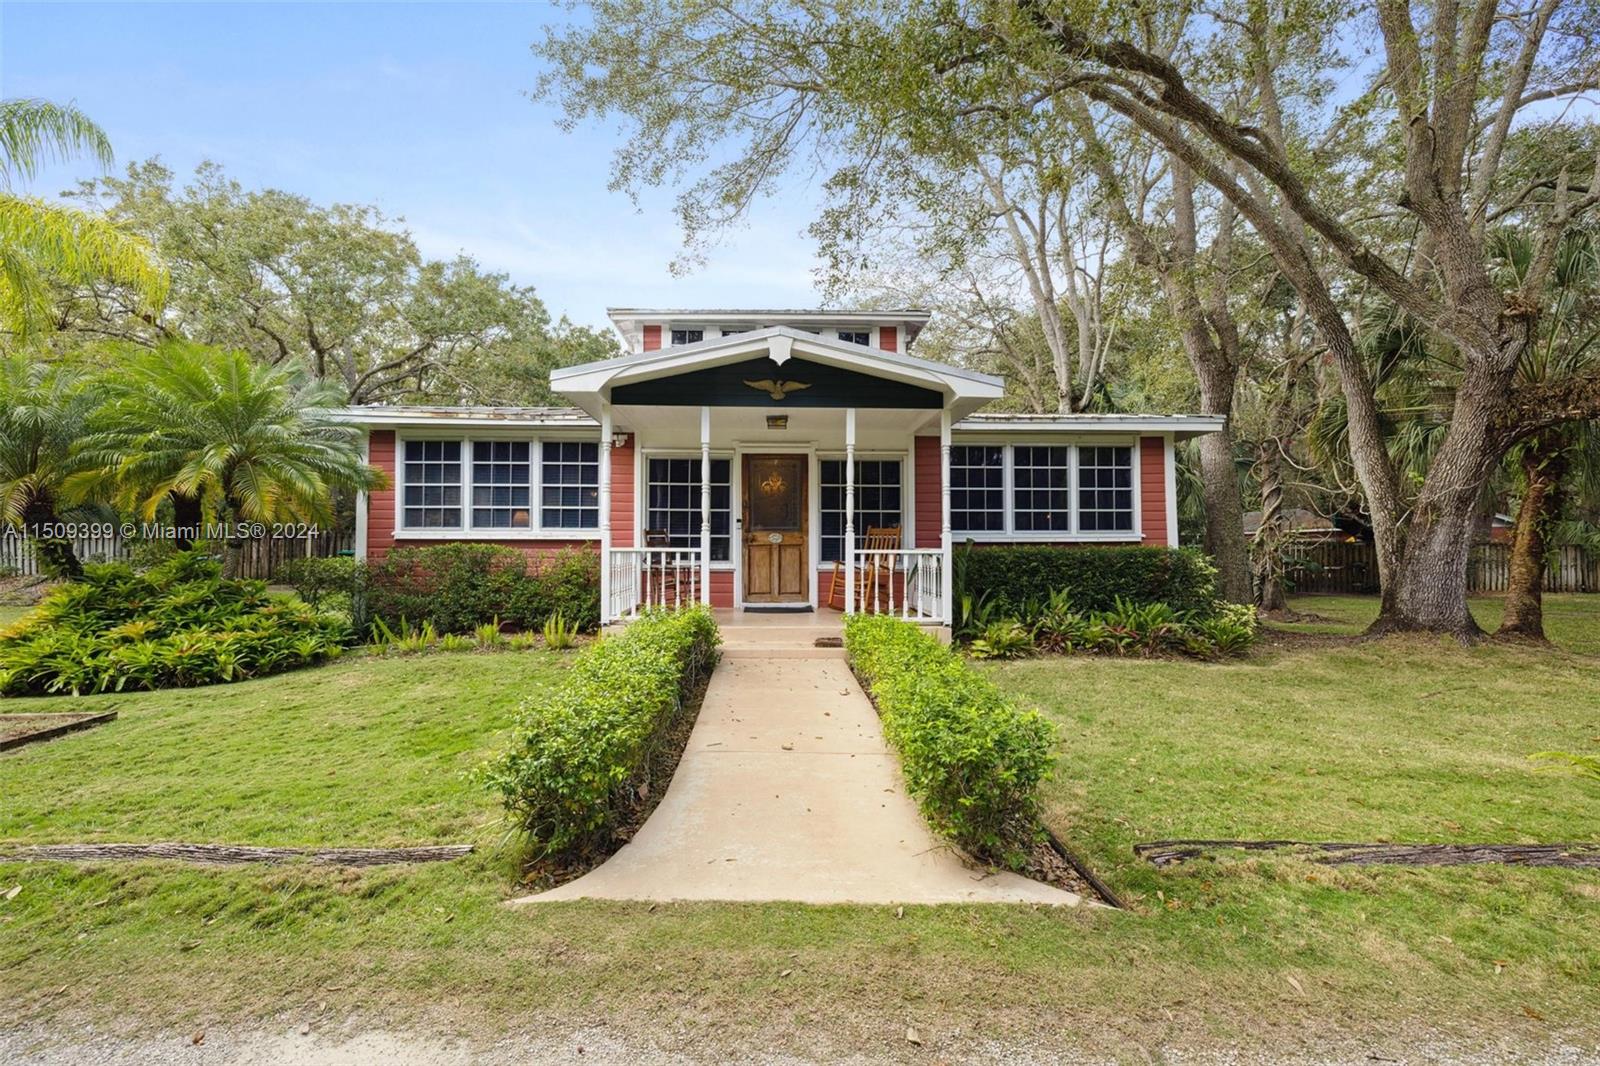 Old Florida Home on 1.95 acres in Palmetto Bay! Crown jewel looking for only its fourth homeowner ever. Improve the existing structure and enjoy all that is South Florida living. Or, build your statement home on this beautiful piece of land. Walk to Coral Reef Park, Southwood Middle School. Once in a lifetime opportunity to lay claim on a unique home and property. Great for hosting large gatherings, a pool, a chickee hut and a gorgeous yard offer quiet enjoyment. The coolest residence in Palmetto Bay makes for a complete family compound. Live, love, laugh, work from home, study at home, play and mingle with multiple generations. Plenty of room for parking your boat or RV. 5 car garage or storage, you decide. Tin roof installed after Andrew. Click tour to see the 3D virtual tour. See survey